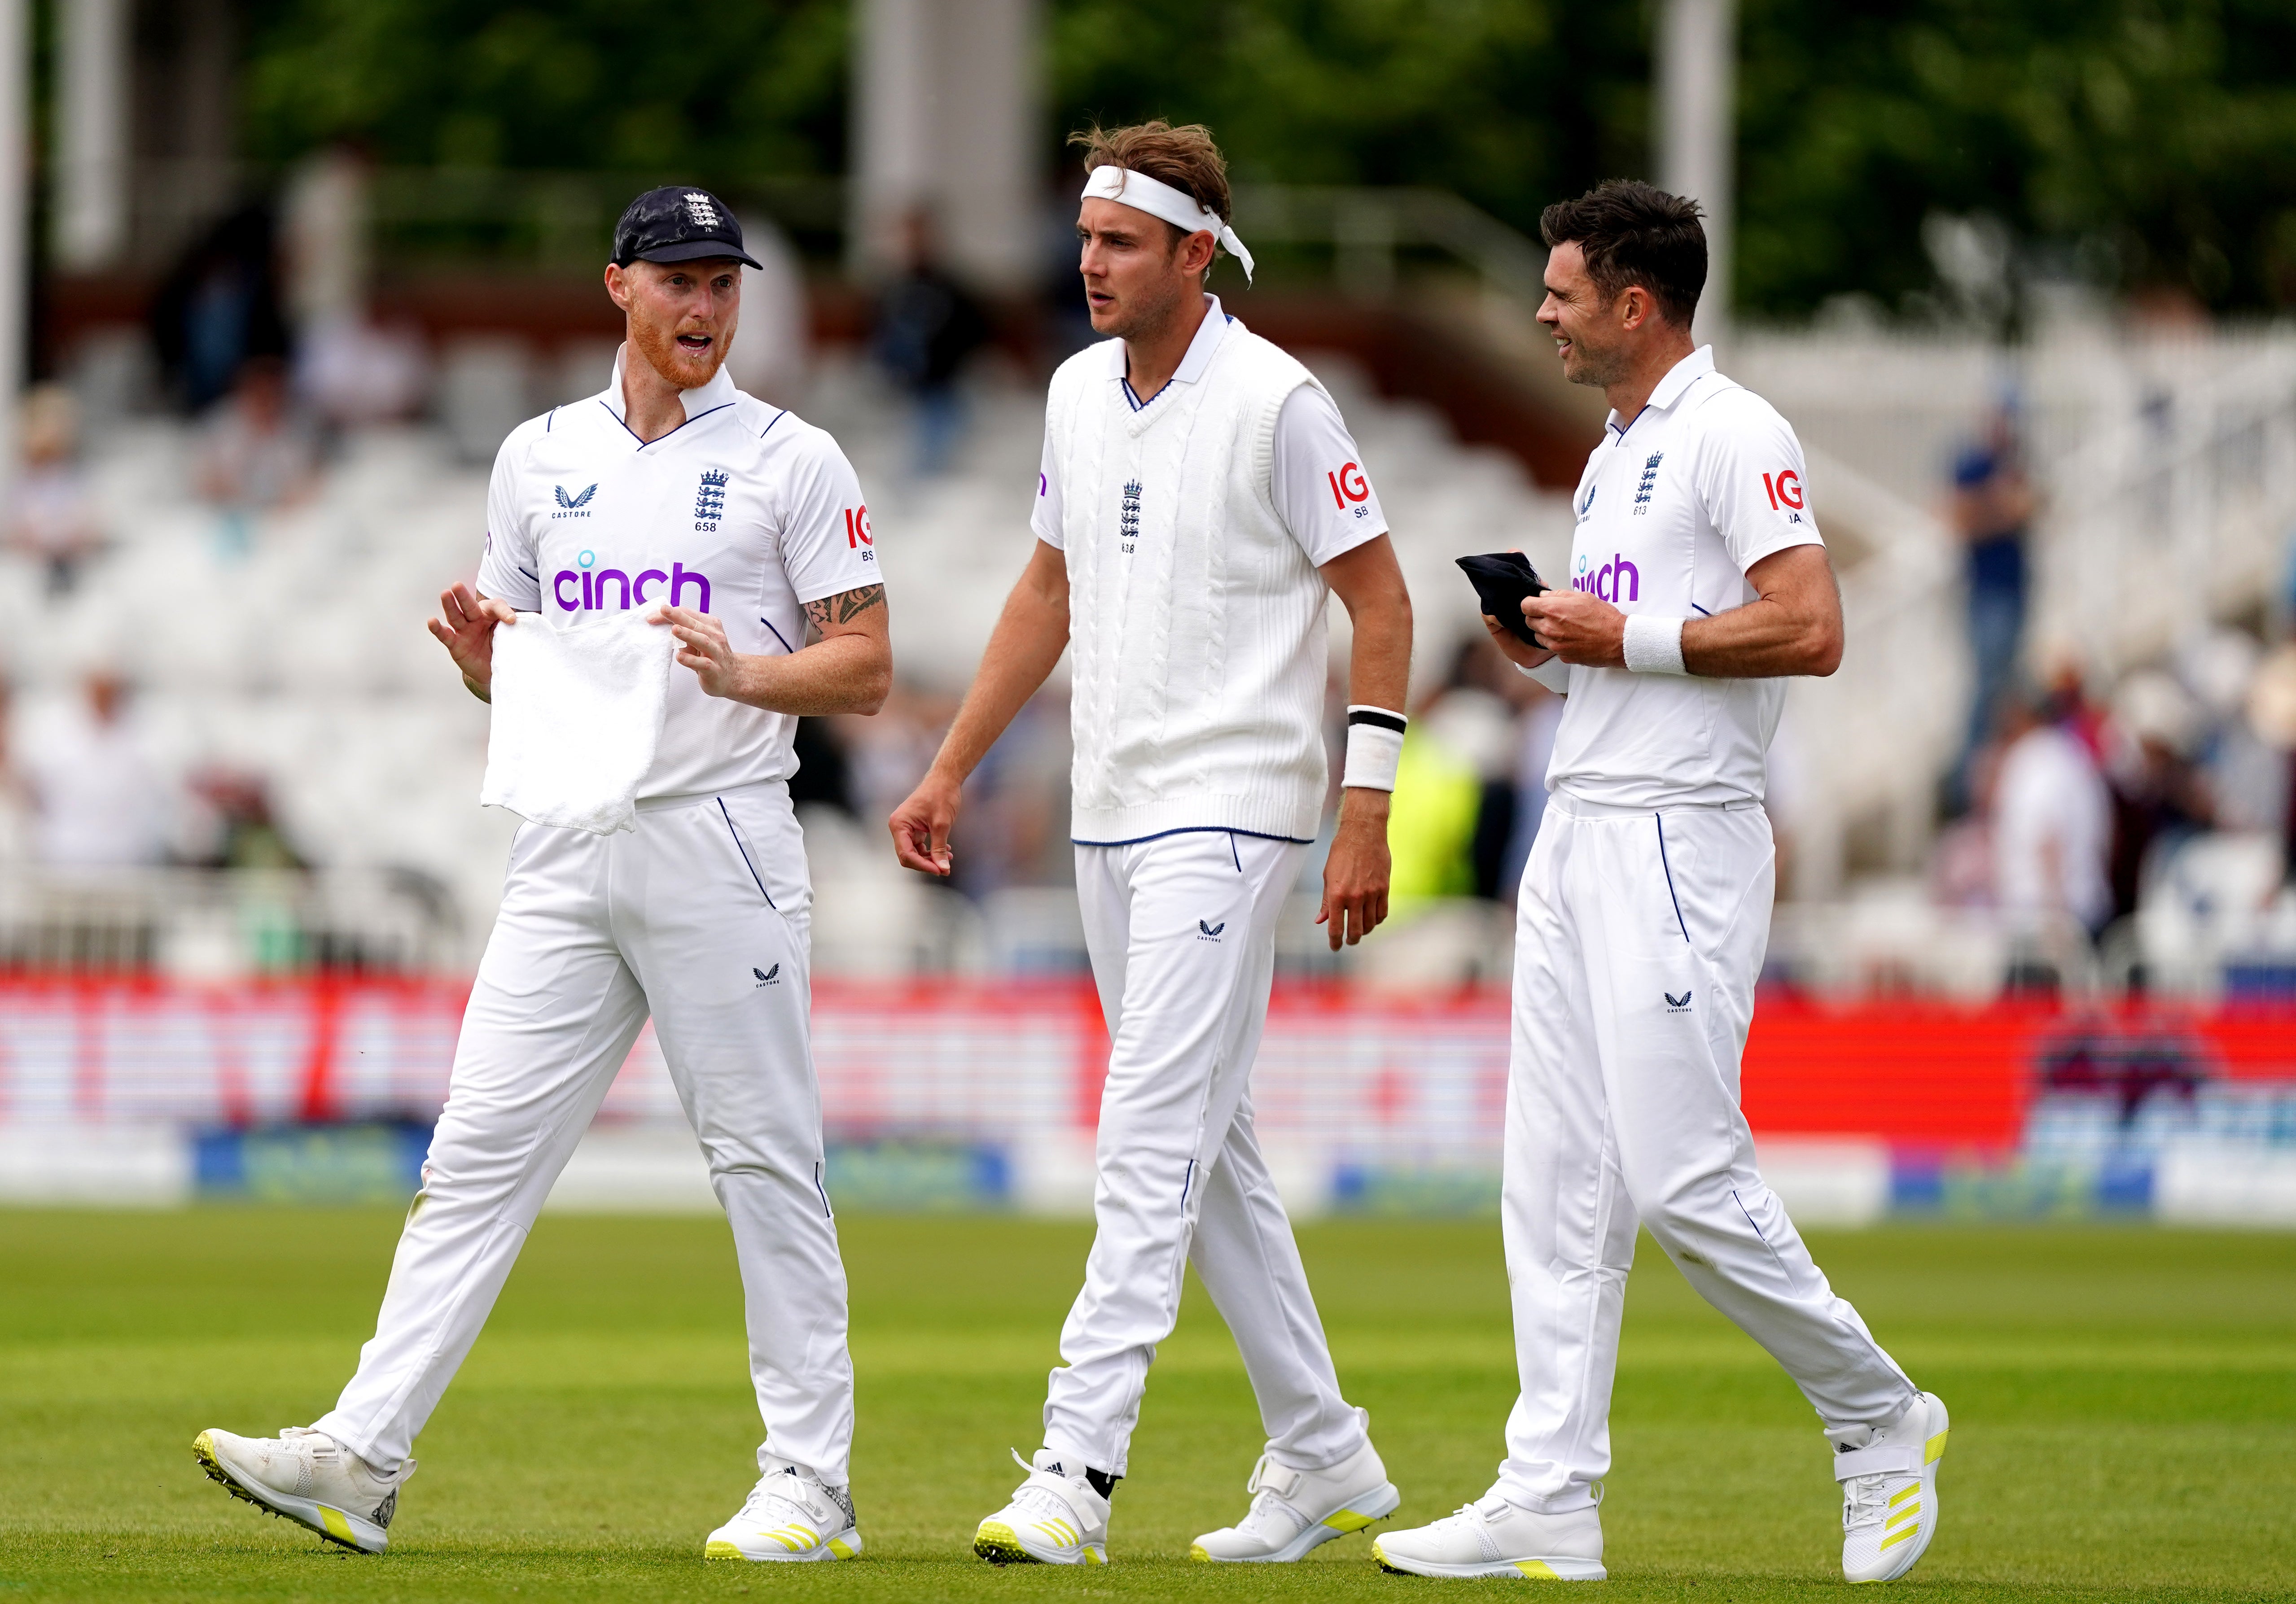 Ben Stokes, pictured with fellow bowlers Stuart Broad and James Anderson